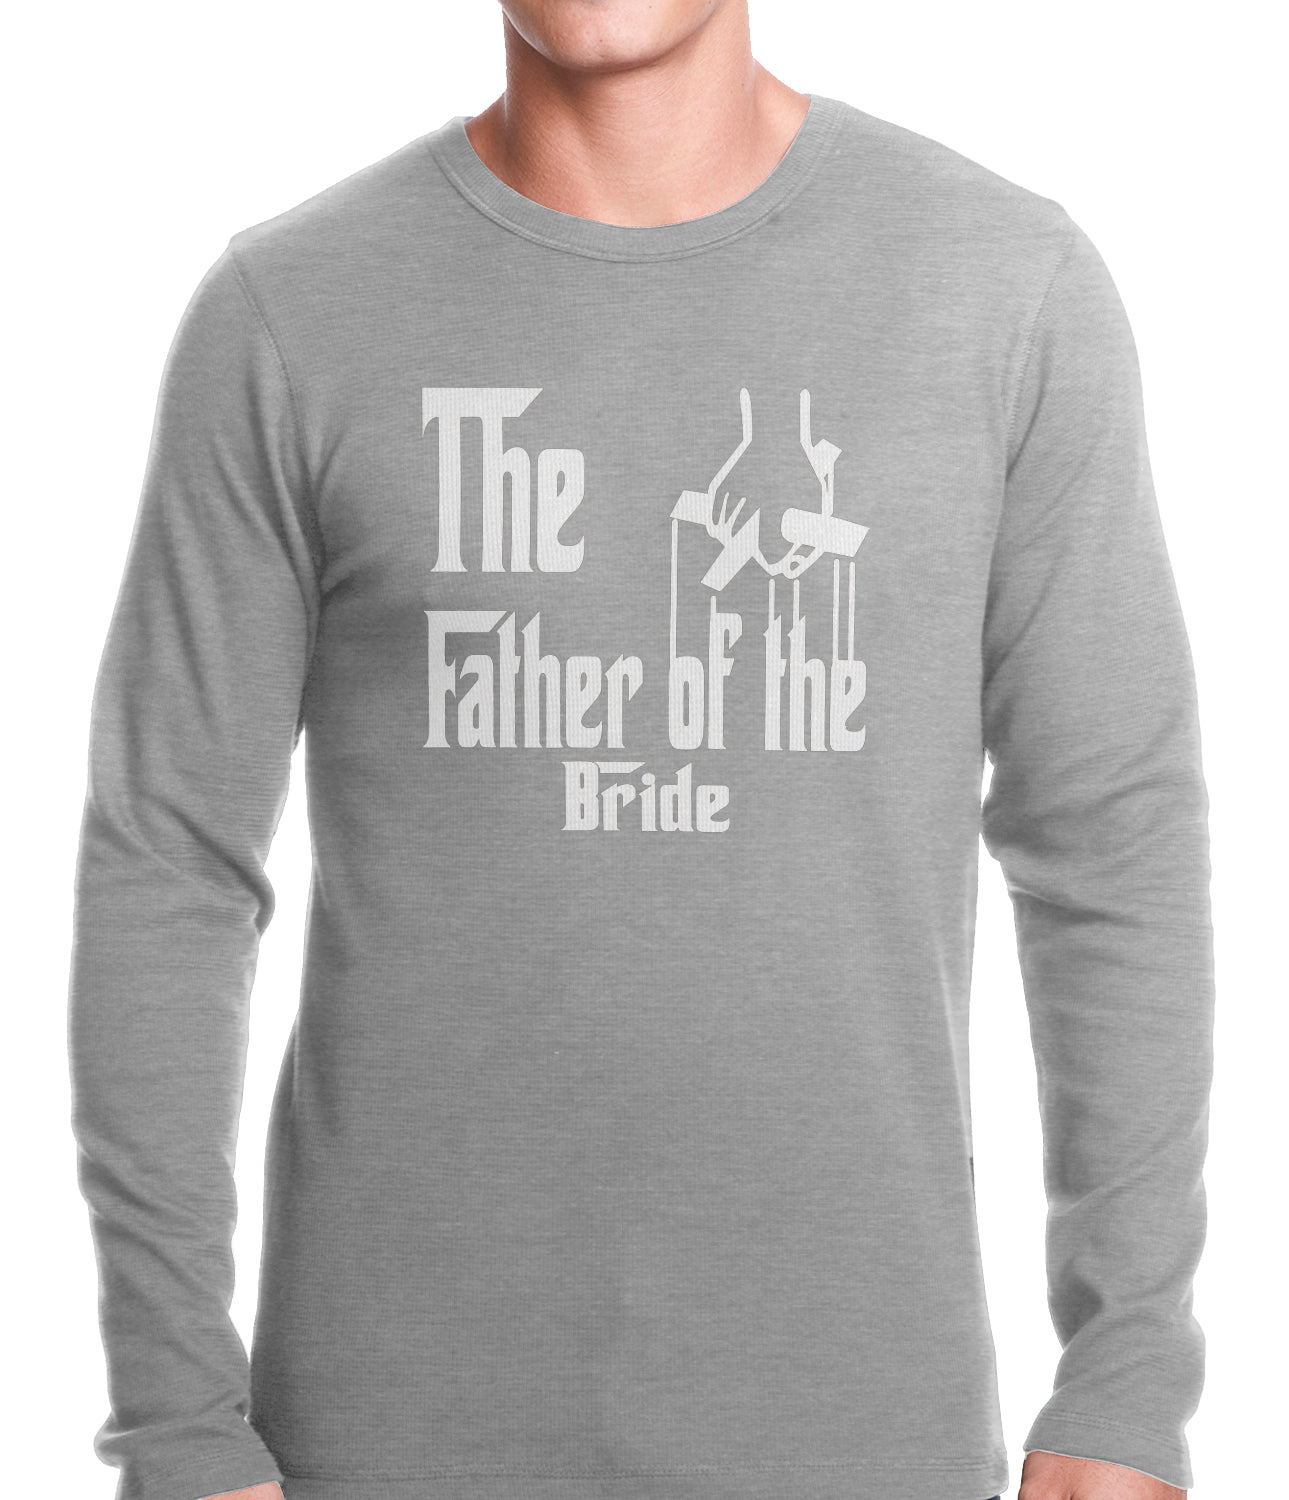 The Father of the Bride Funny Thermal Shirt